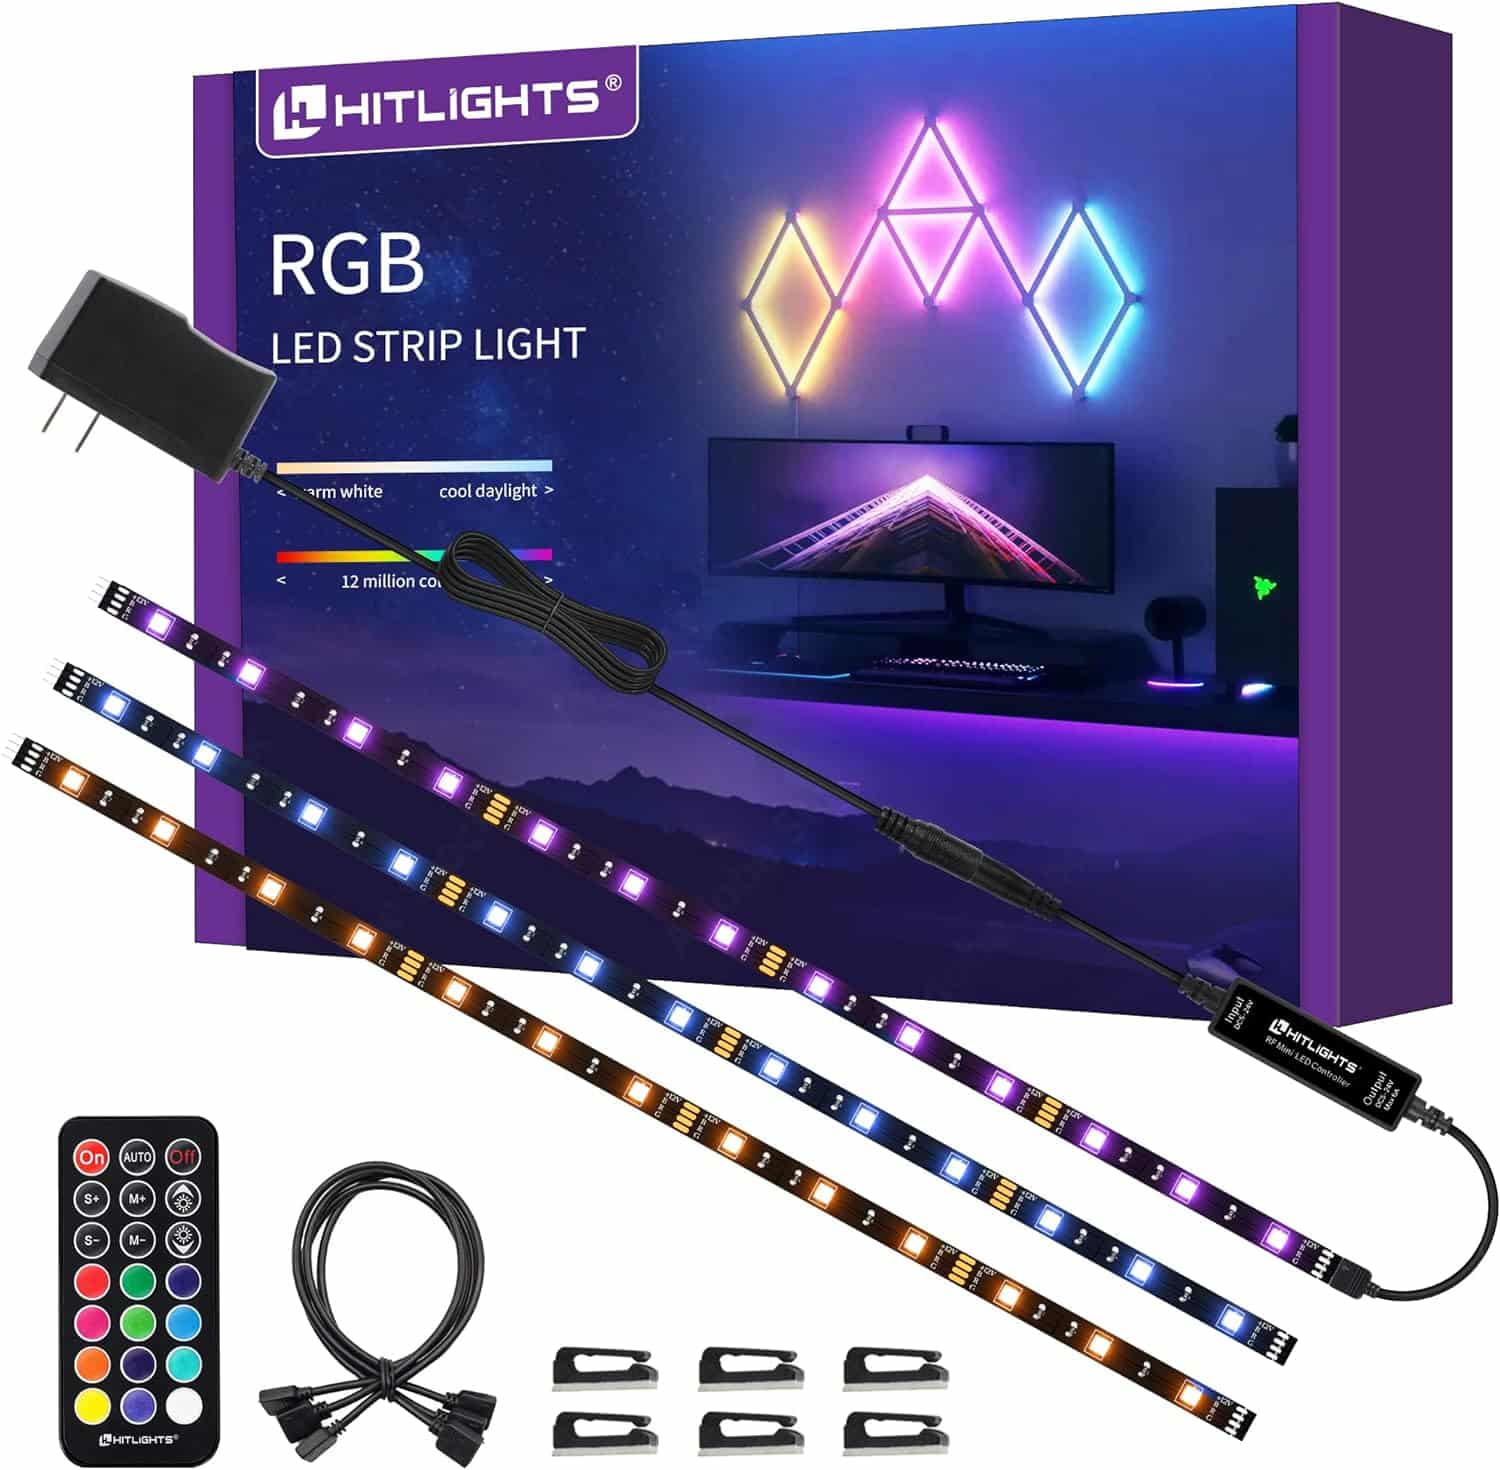 Hitlights LED Strip Lights 3 Pcs 1.64FT RGB Small LED Light Strips Kit Dimmable RGB 5050 Color Changing Tape Lights TV Backlight Display Case Lights Shelves Lighting with RF Remote  UL-Listed Adapter